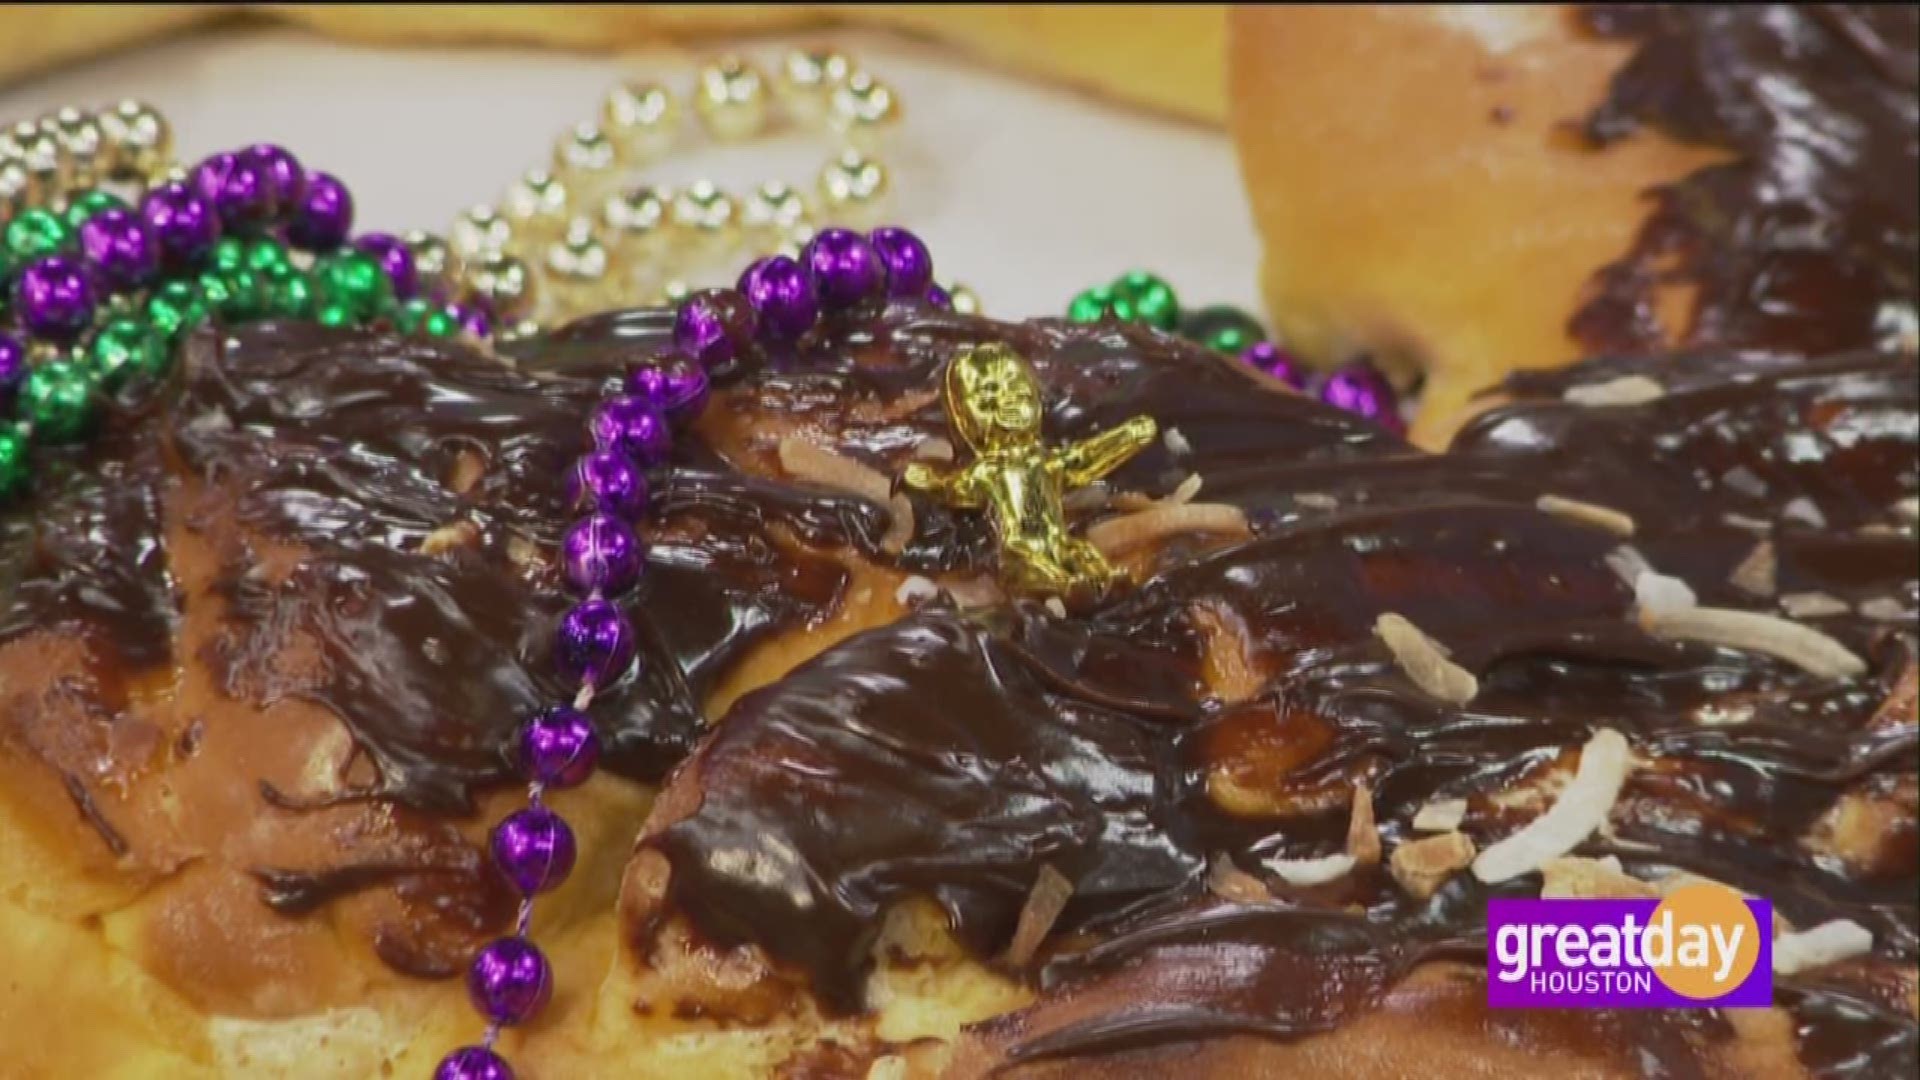 It's a tasty part of Mardi Gras. Concetta Maceo with Maceo Spice and Imports discusses the history of the King Cake.